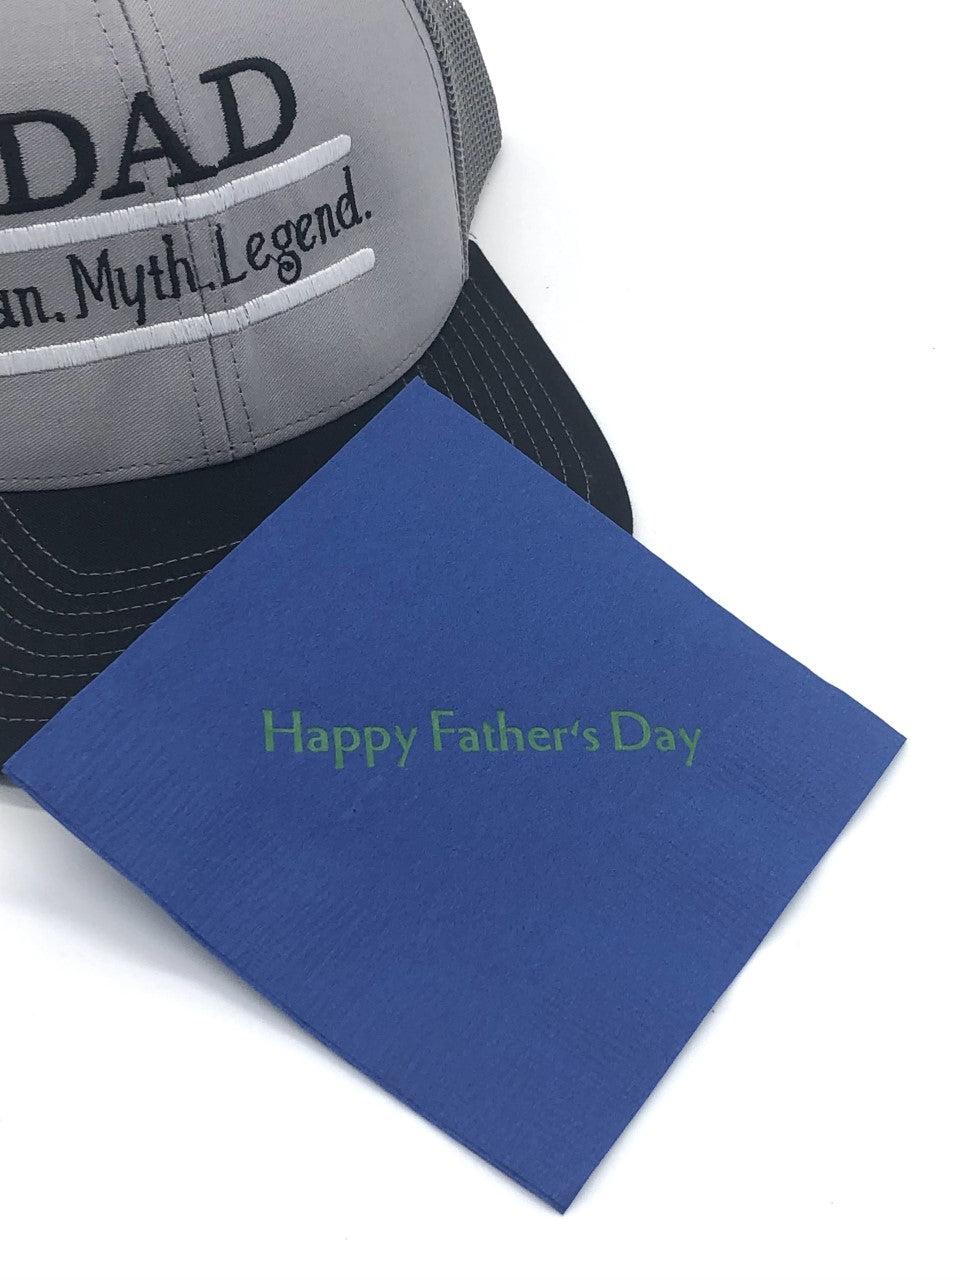 Dark blue cocktail napkins with green Happy Father's Day slogan